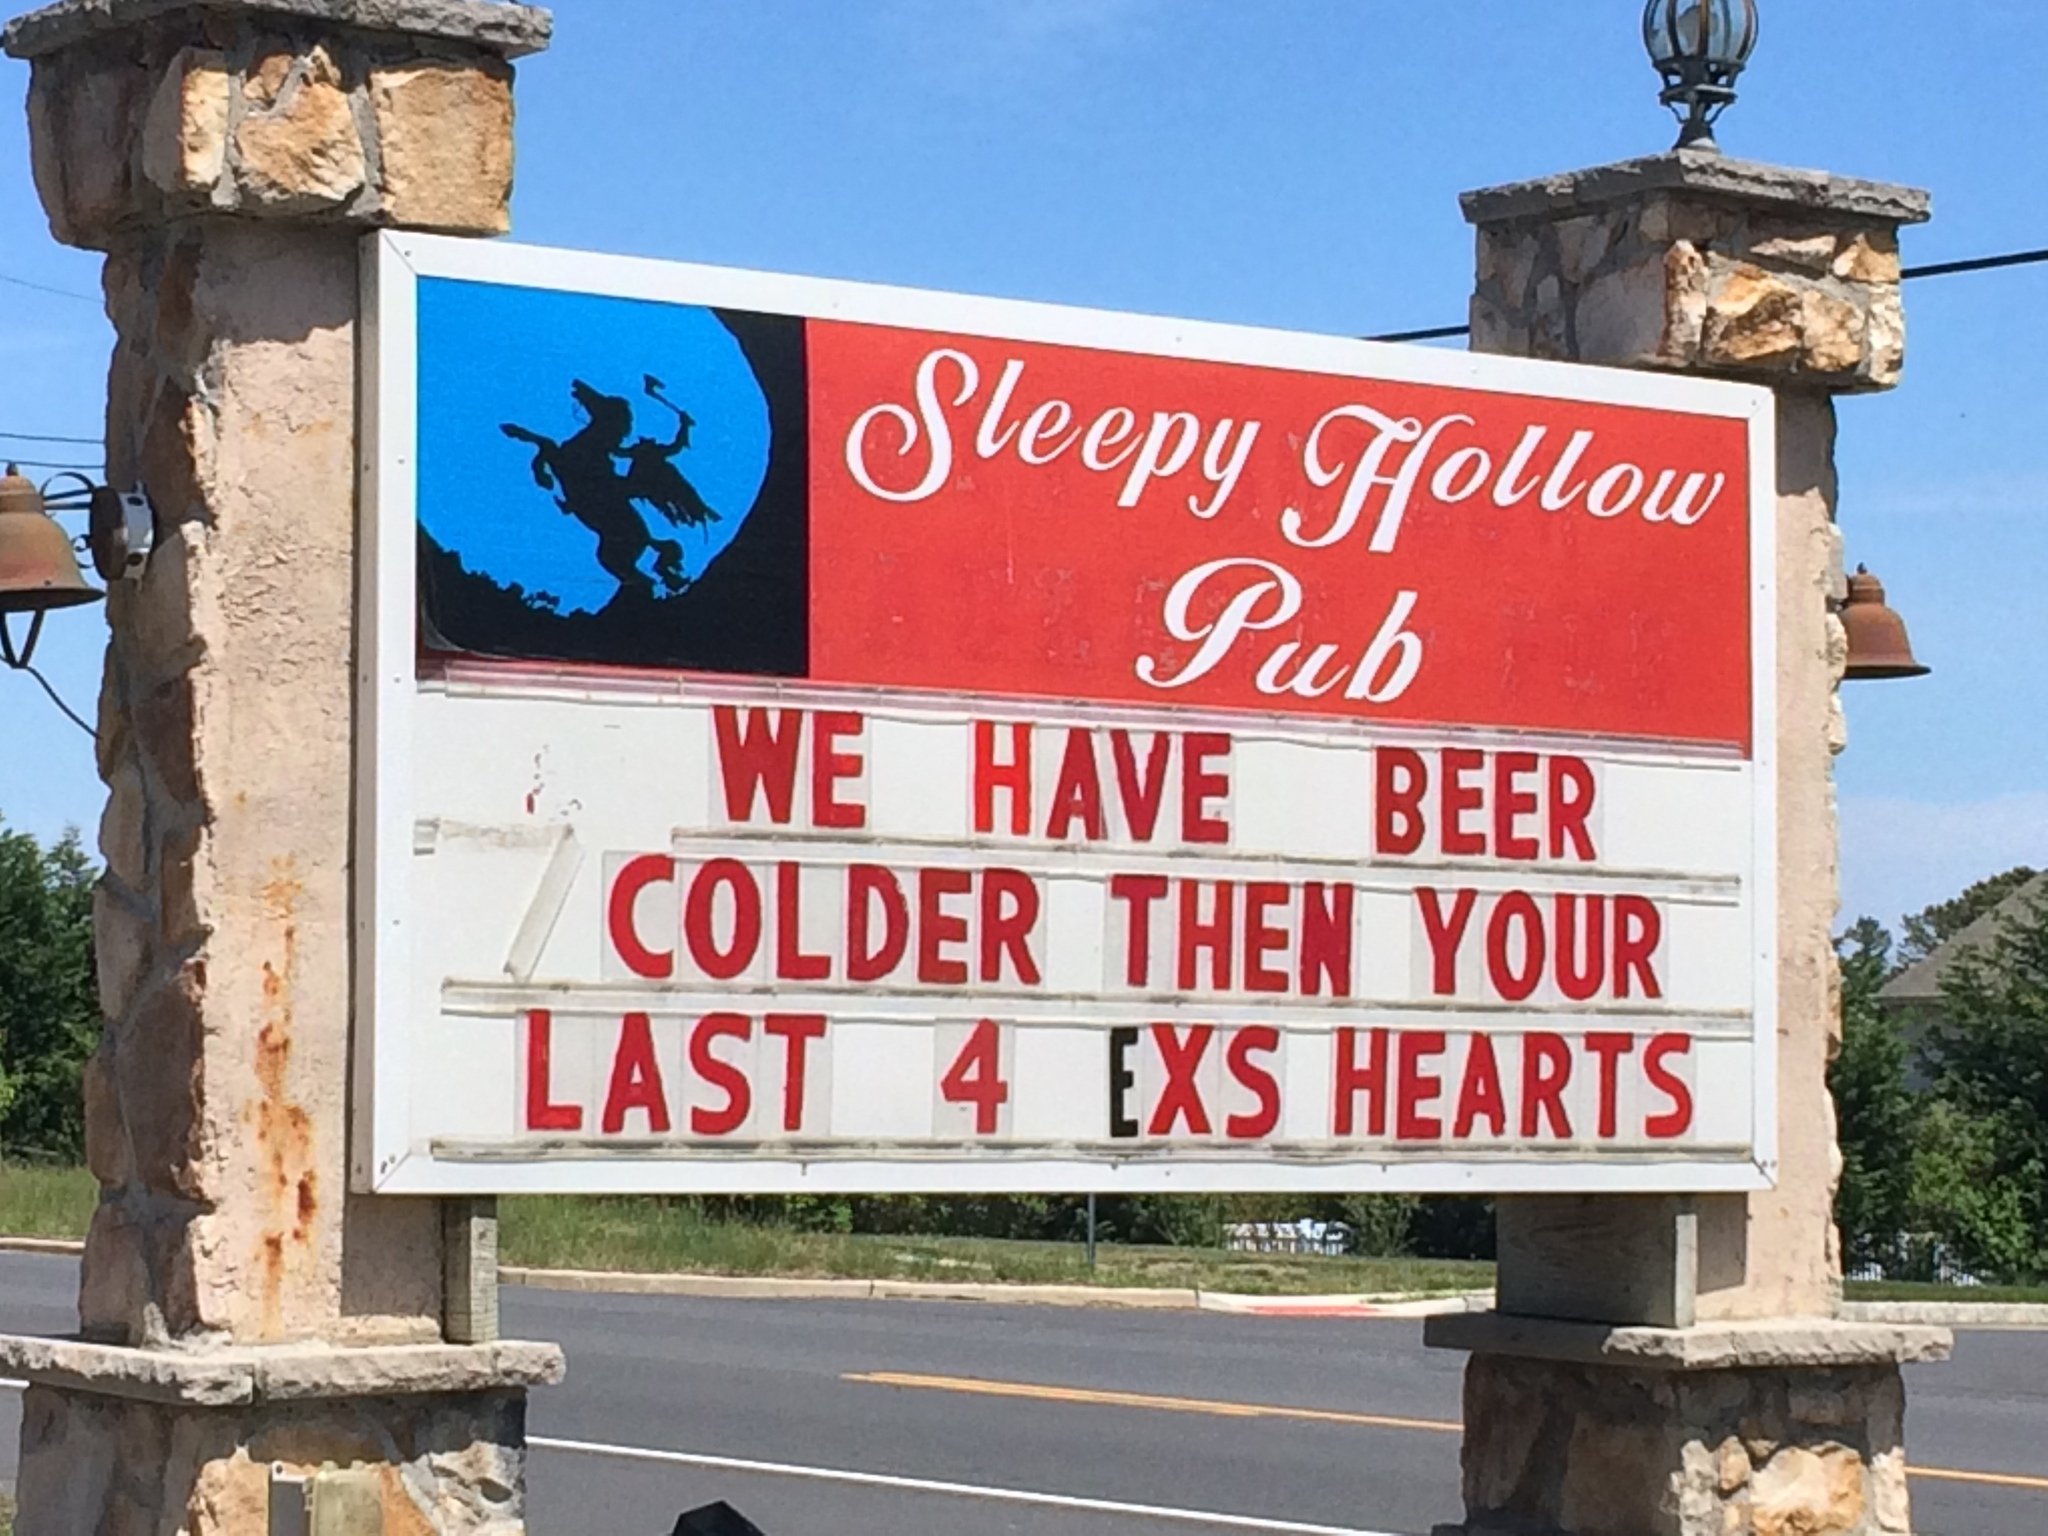 N.J.'s funniest signs: 'Testy' hot dogs, live pig raffle, and more ...